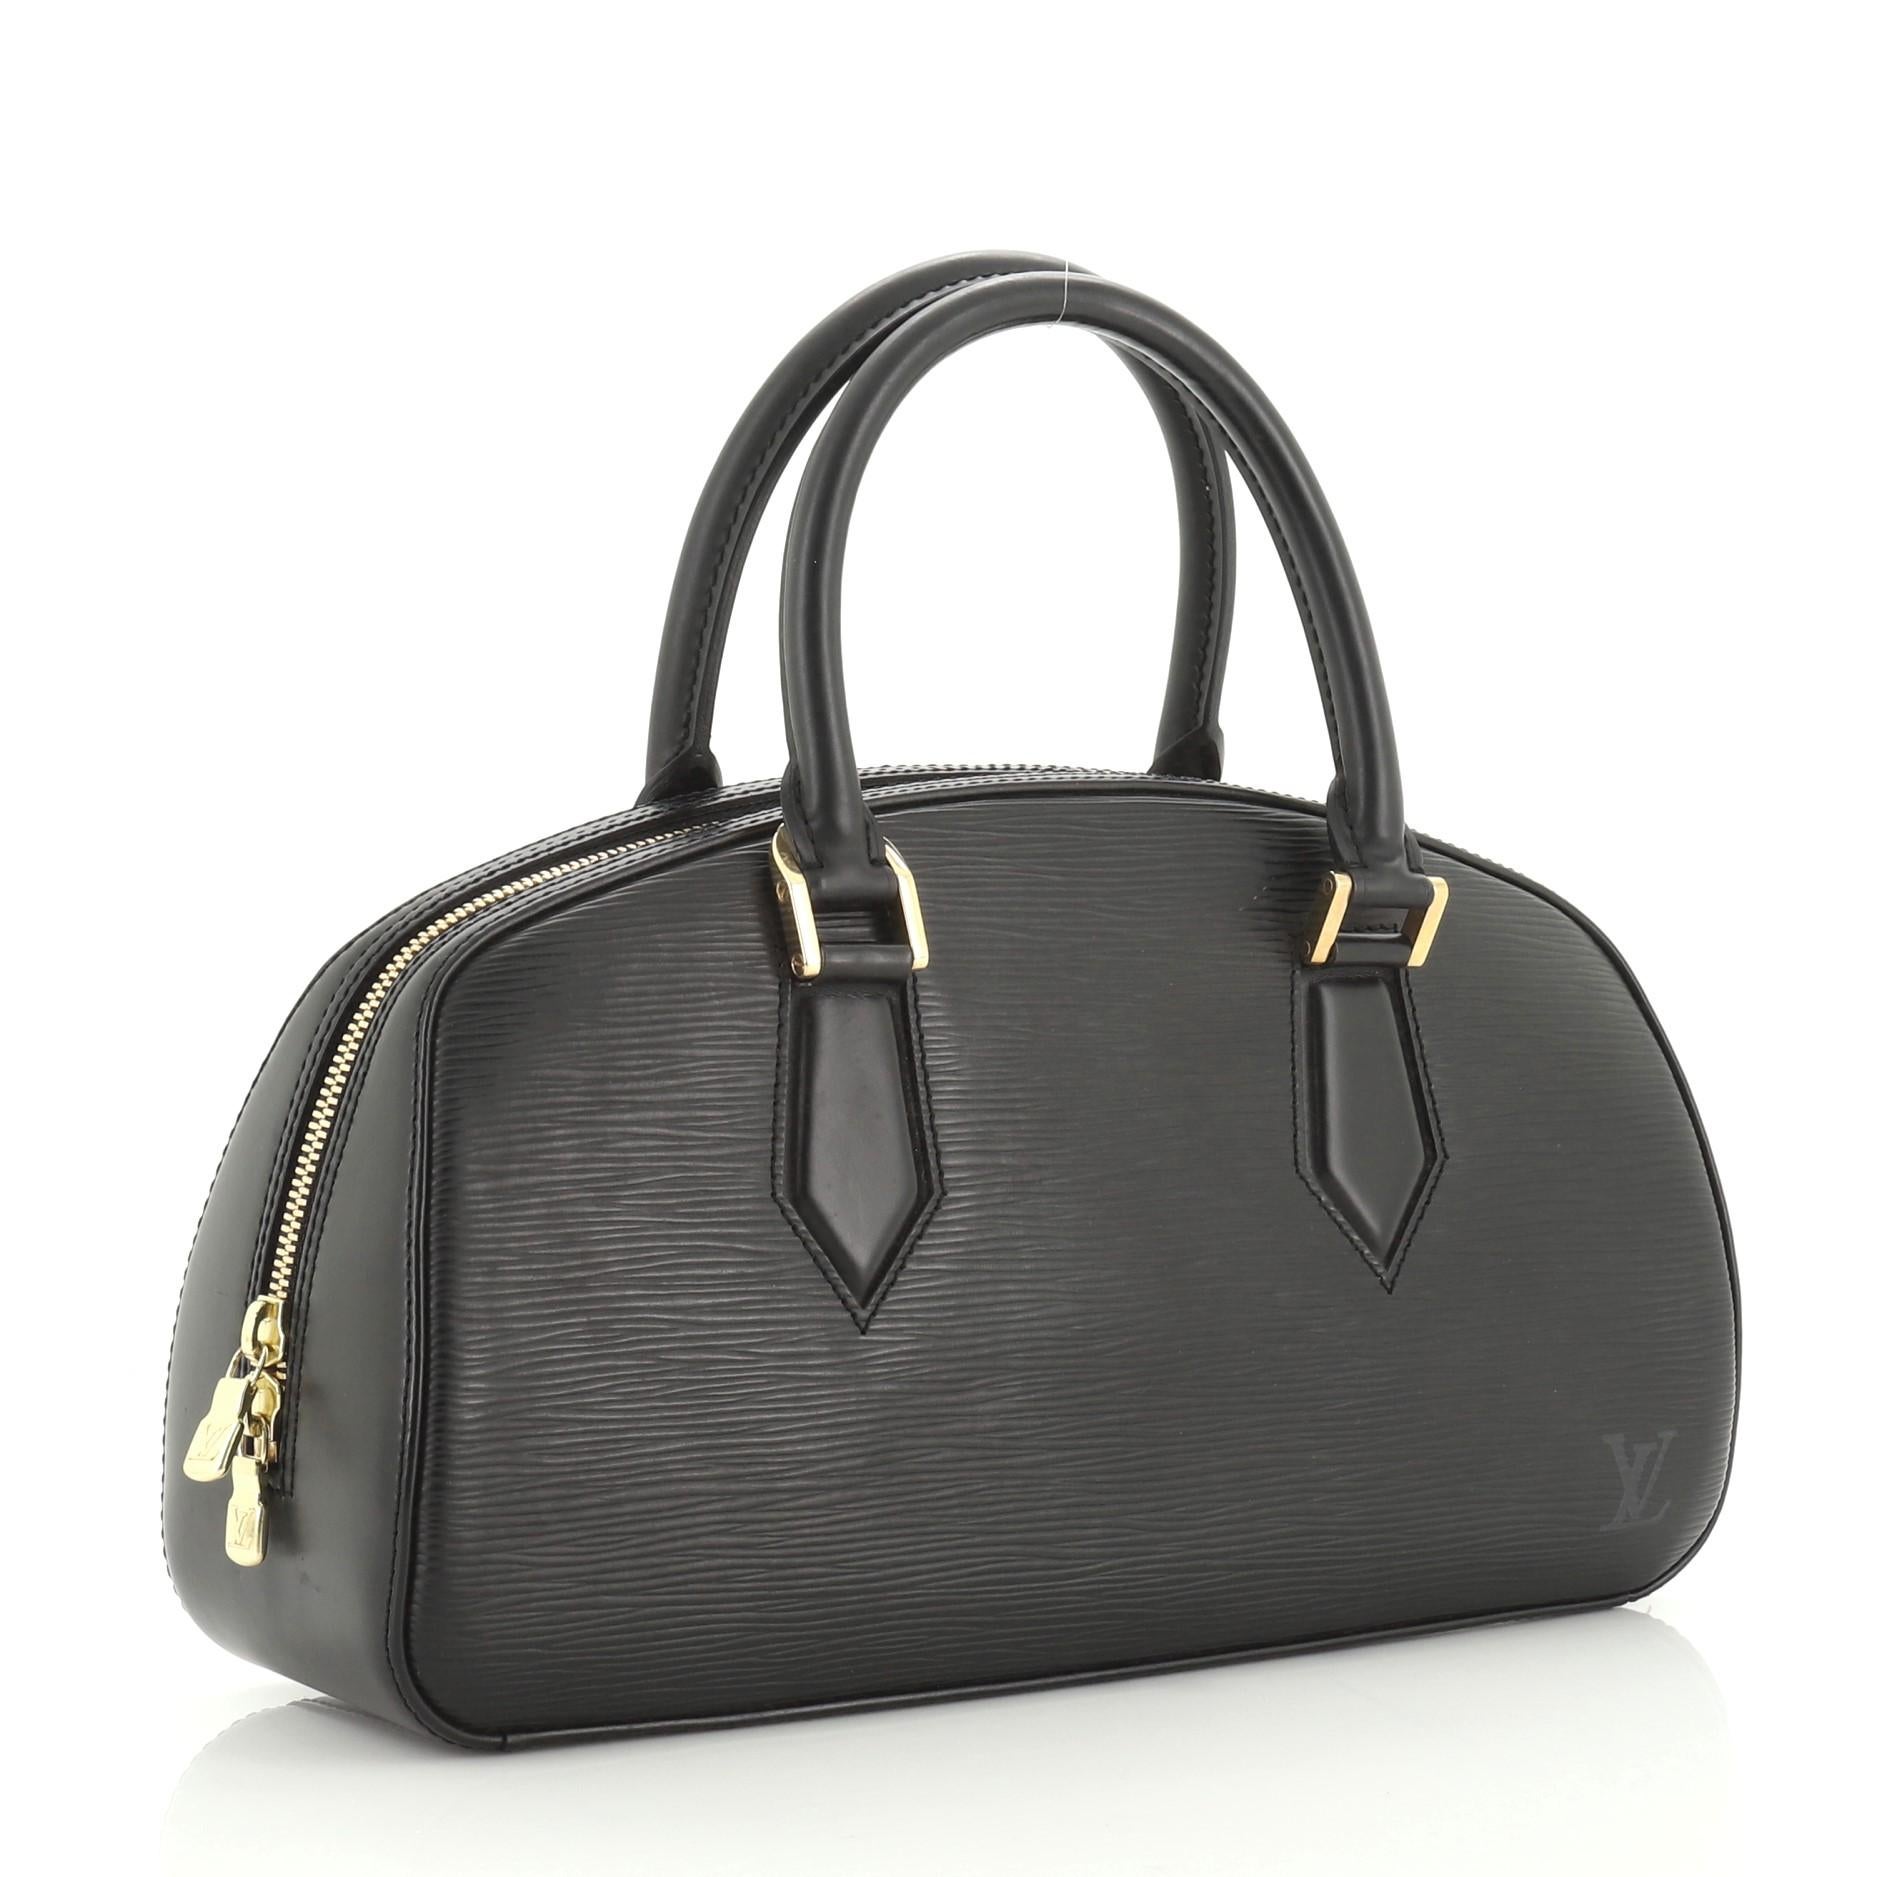 This Louis Vuitton Jasmin Bag Epi Leather, crafted with black epi leather, features dual rolled leather handles, subtle LV logo at the front and gold-tone hardware. Its all-around zip closure opens to a gray microfiber interior with slip pocket.